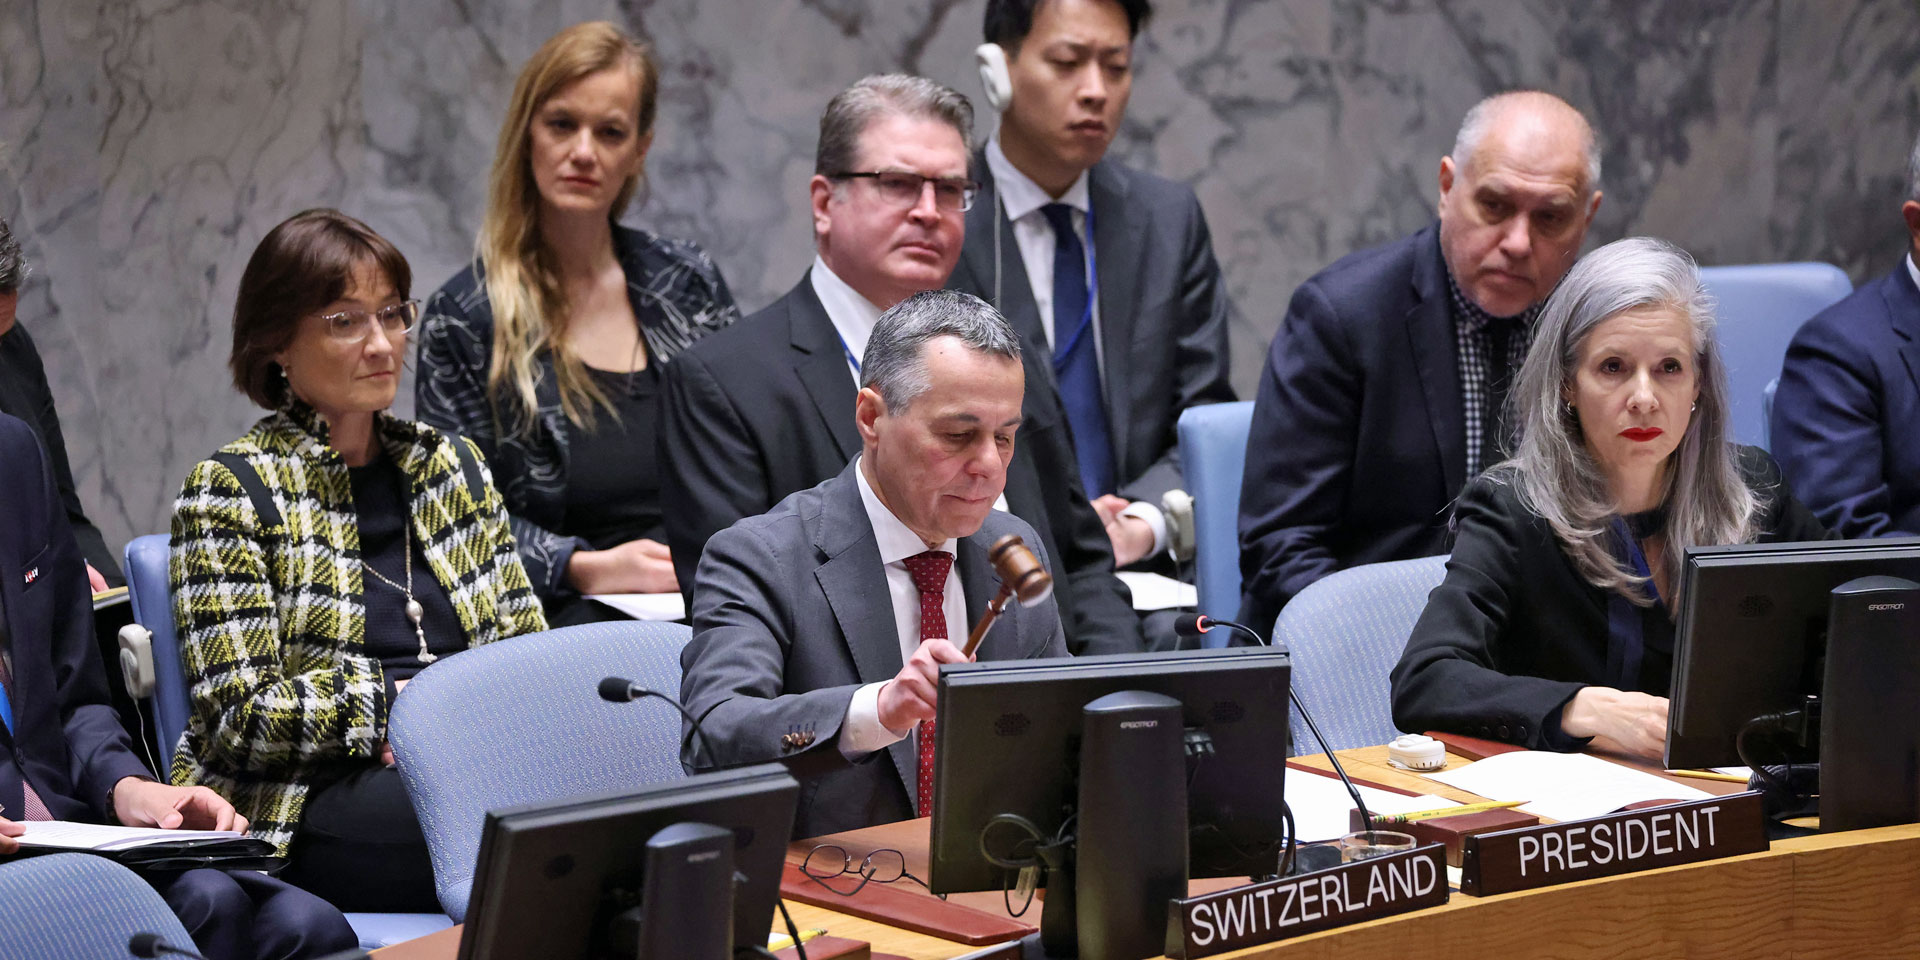 Federal Councillor Ignazio Cassis sits at the horseshoe-shaped table of the UN Security Council. In front of him is a wooden sign with the inscription "President".